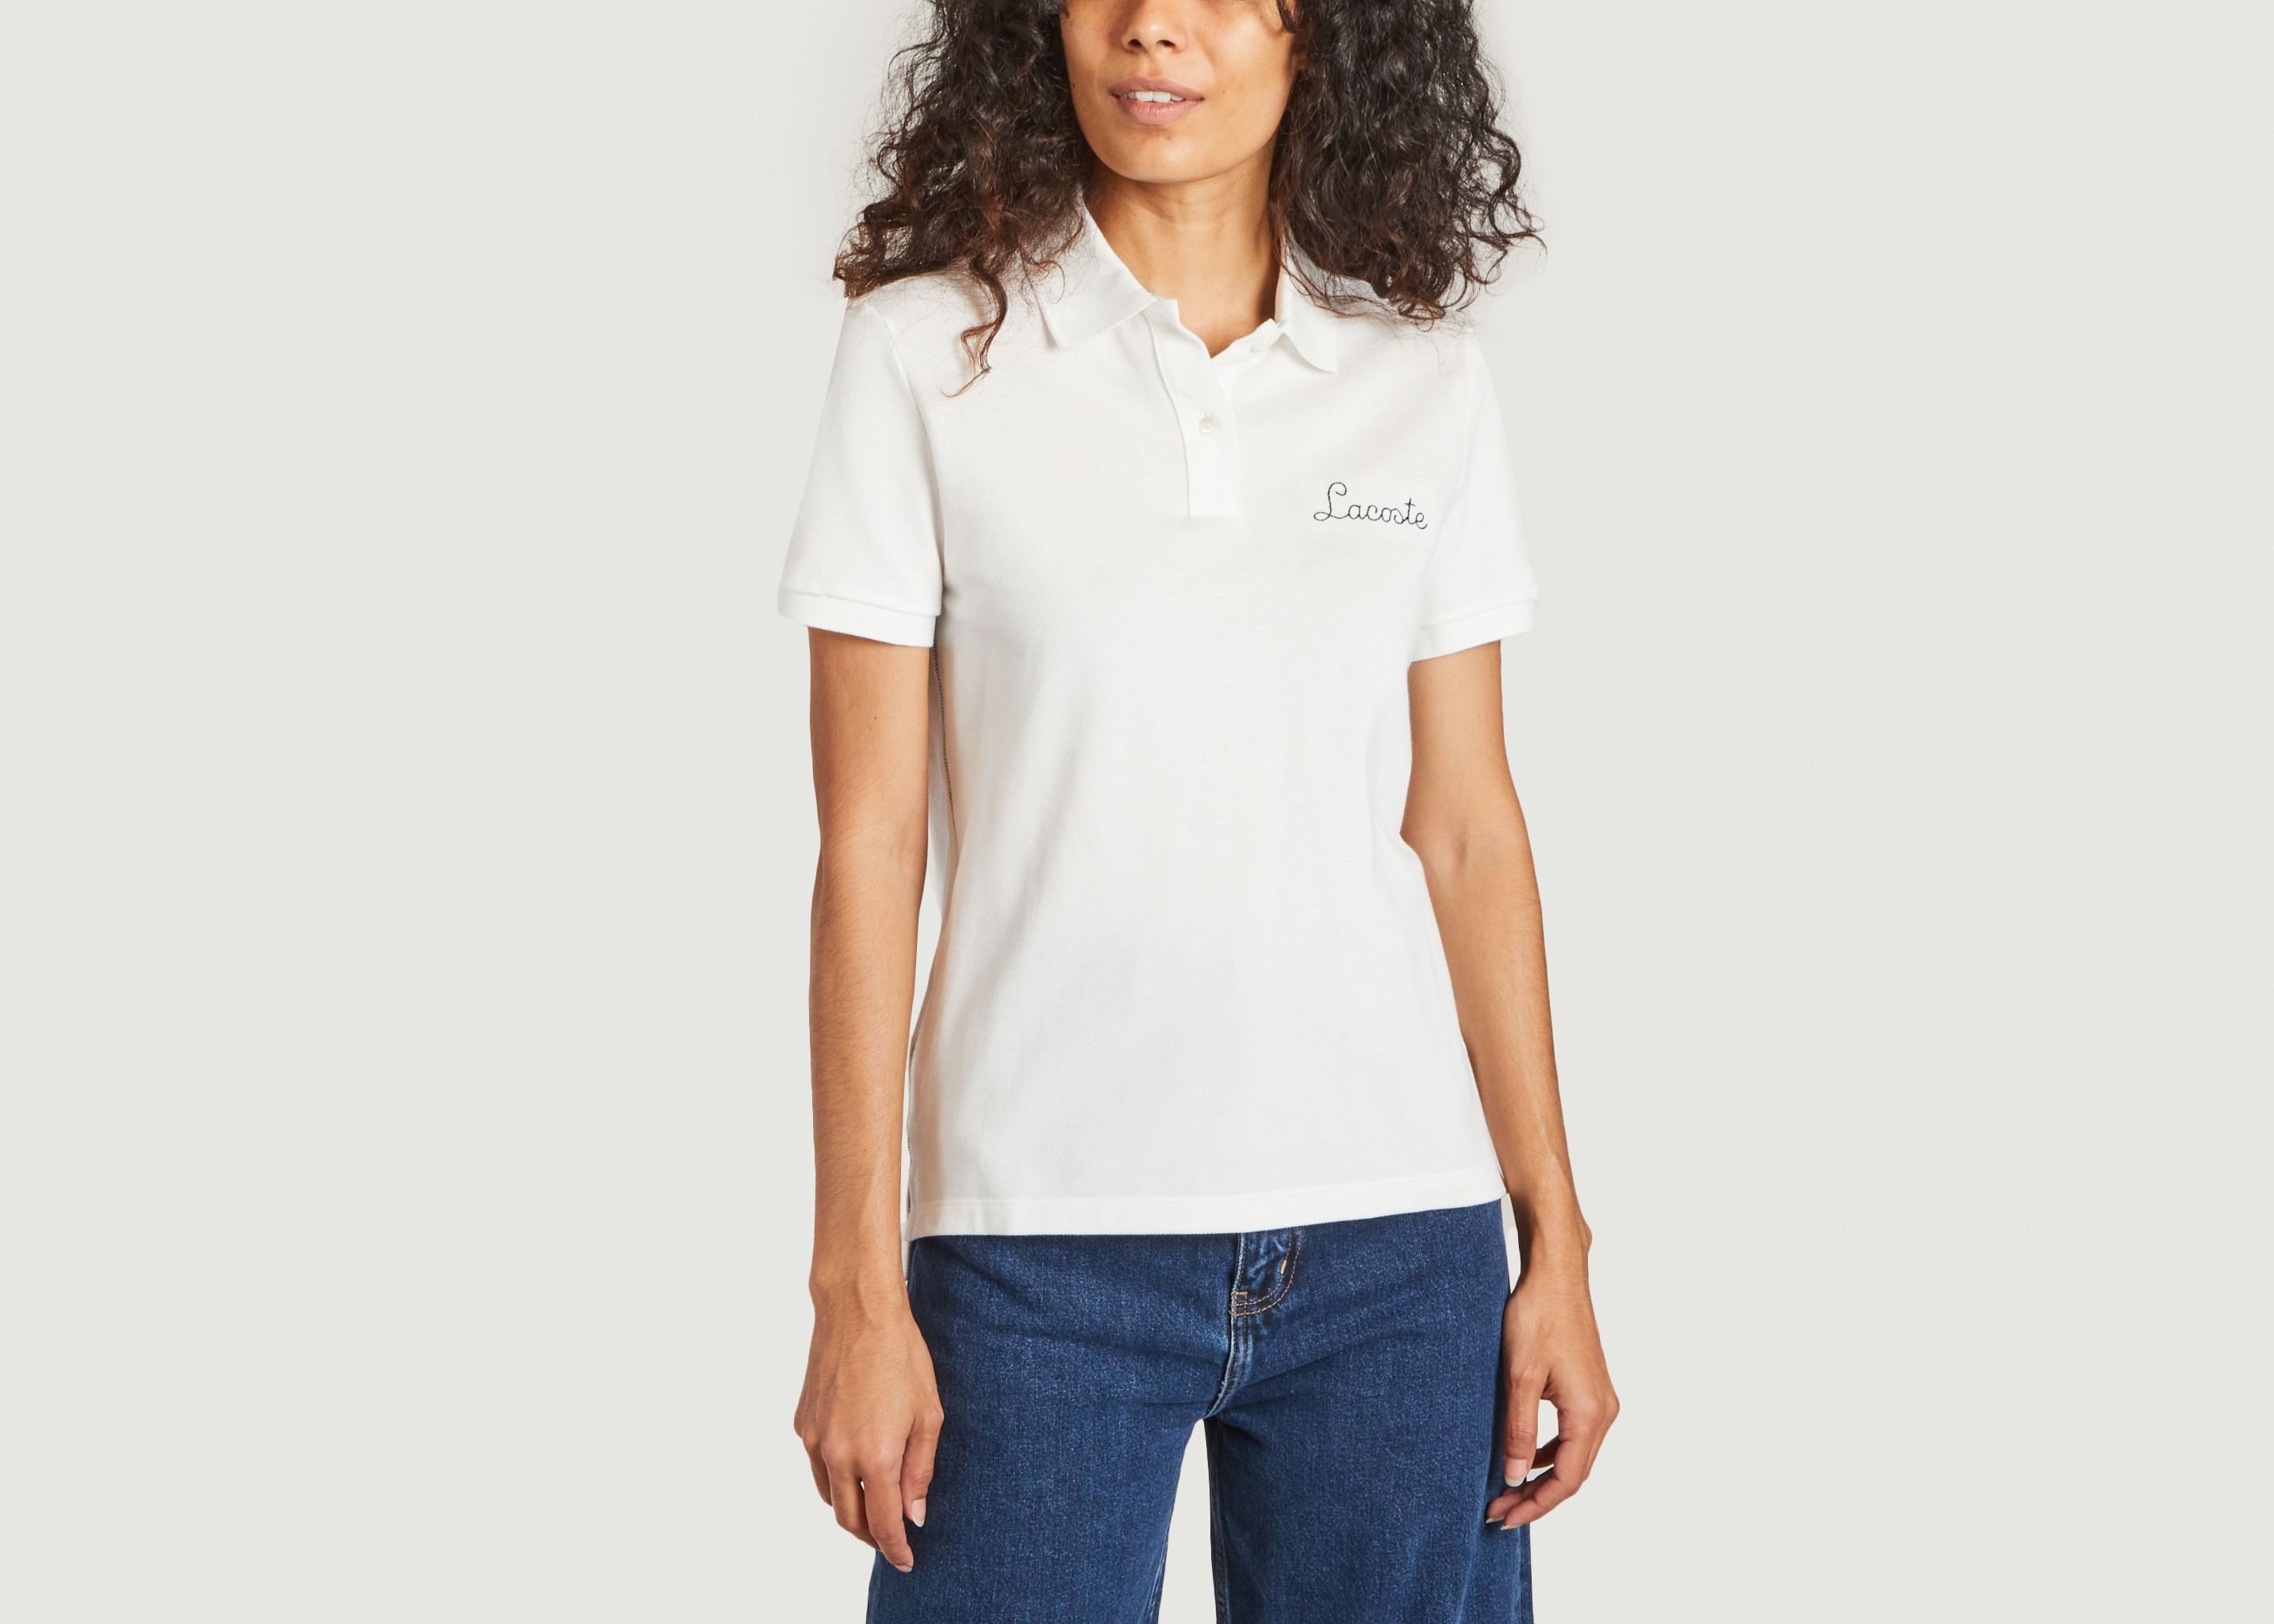 Embroidered logo polo shirt - Lacoste